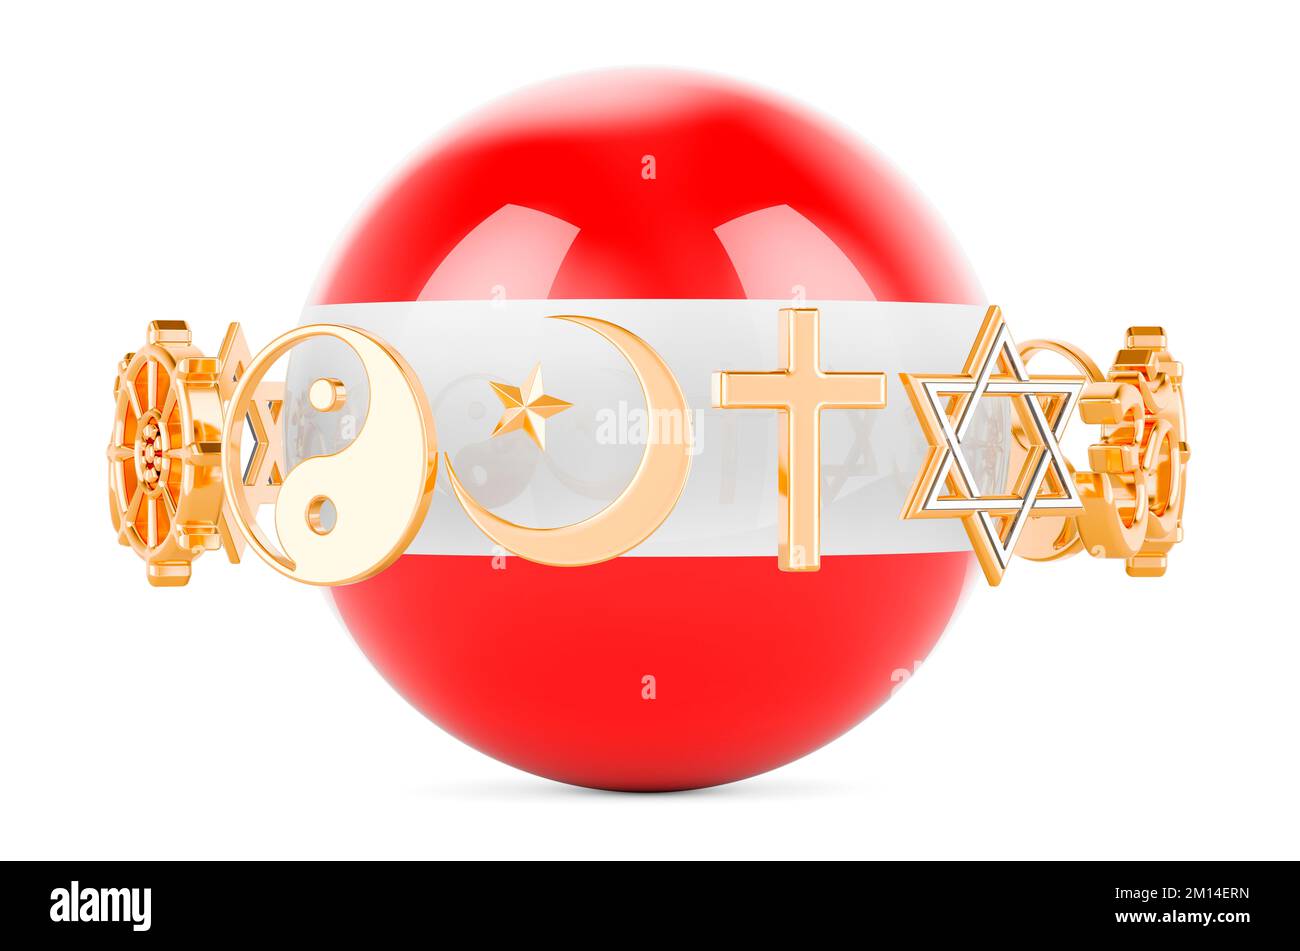 Austrian flag painted on sphere with religions symbols around, 3D rendering isolated on white background Stock Photo